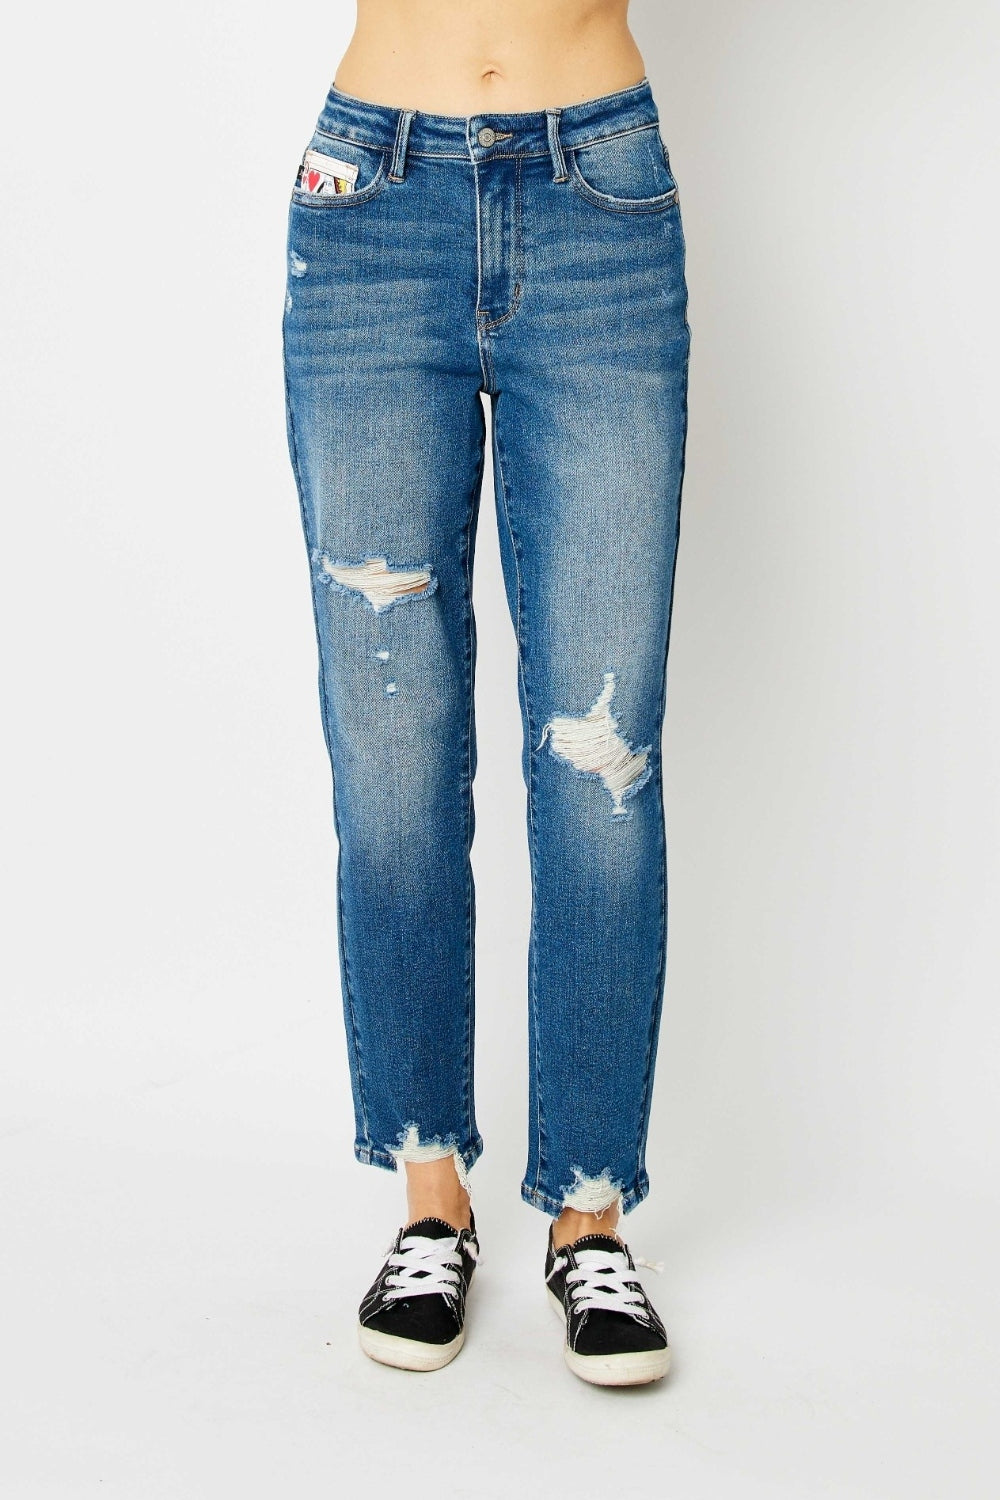 Queen of Hearts Distressed Slim Jeans by Judy Blue